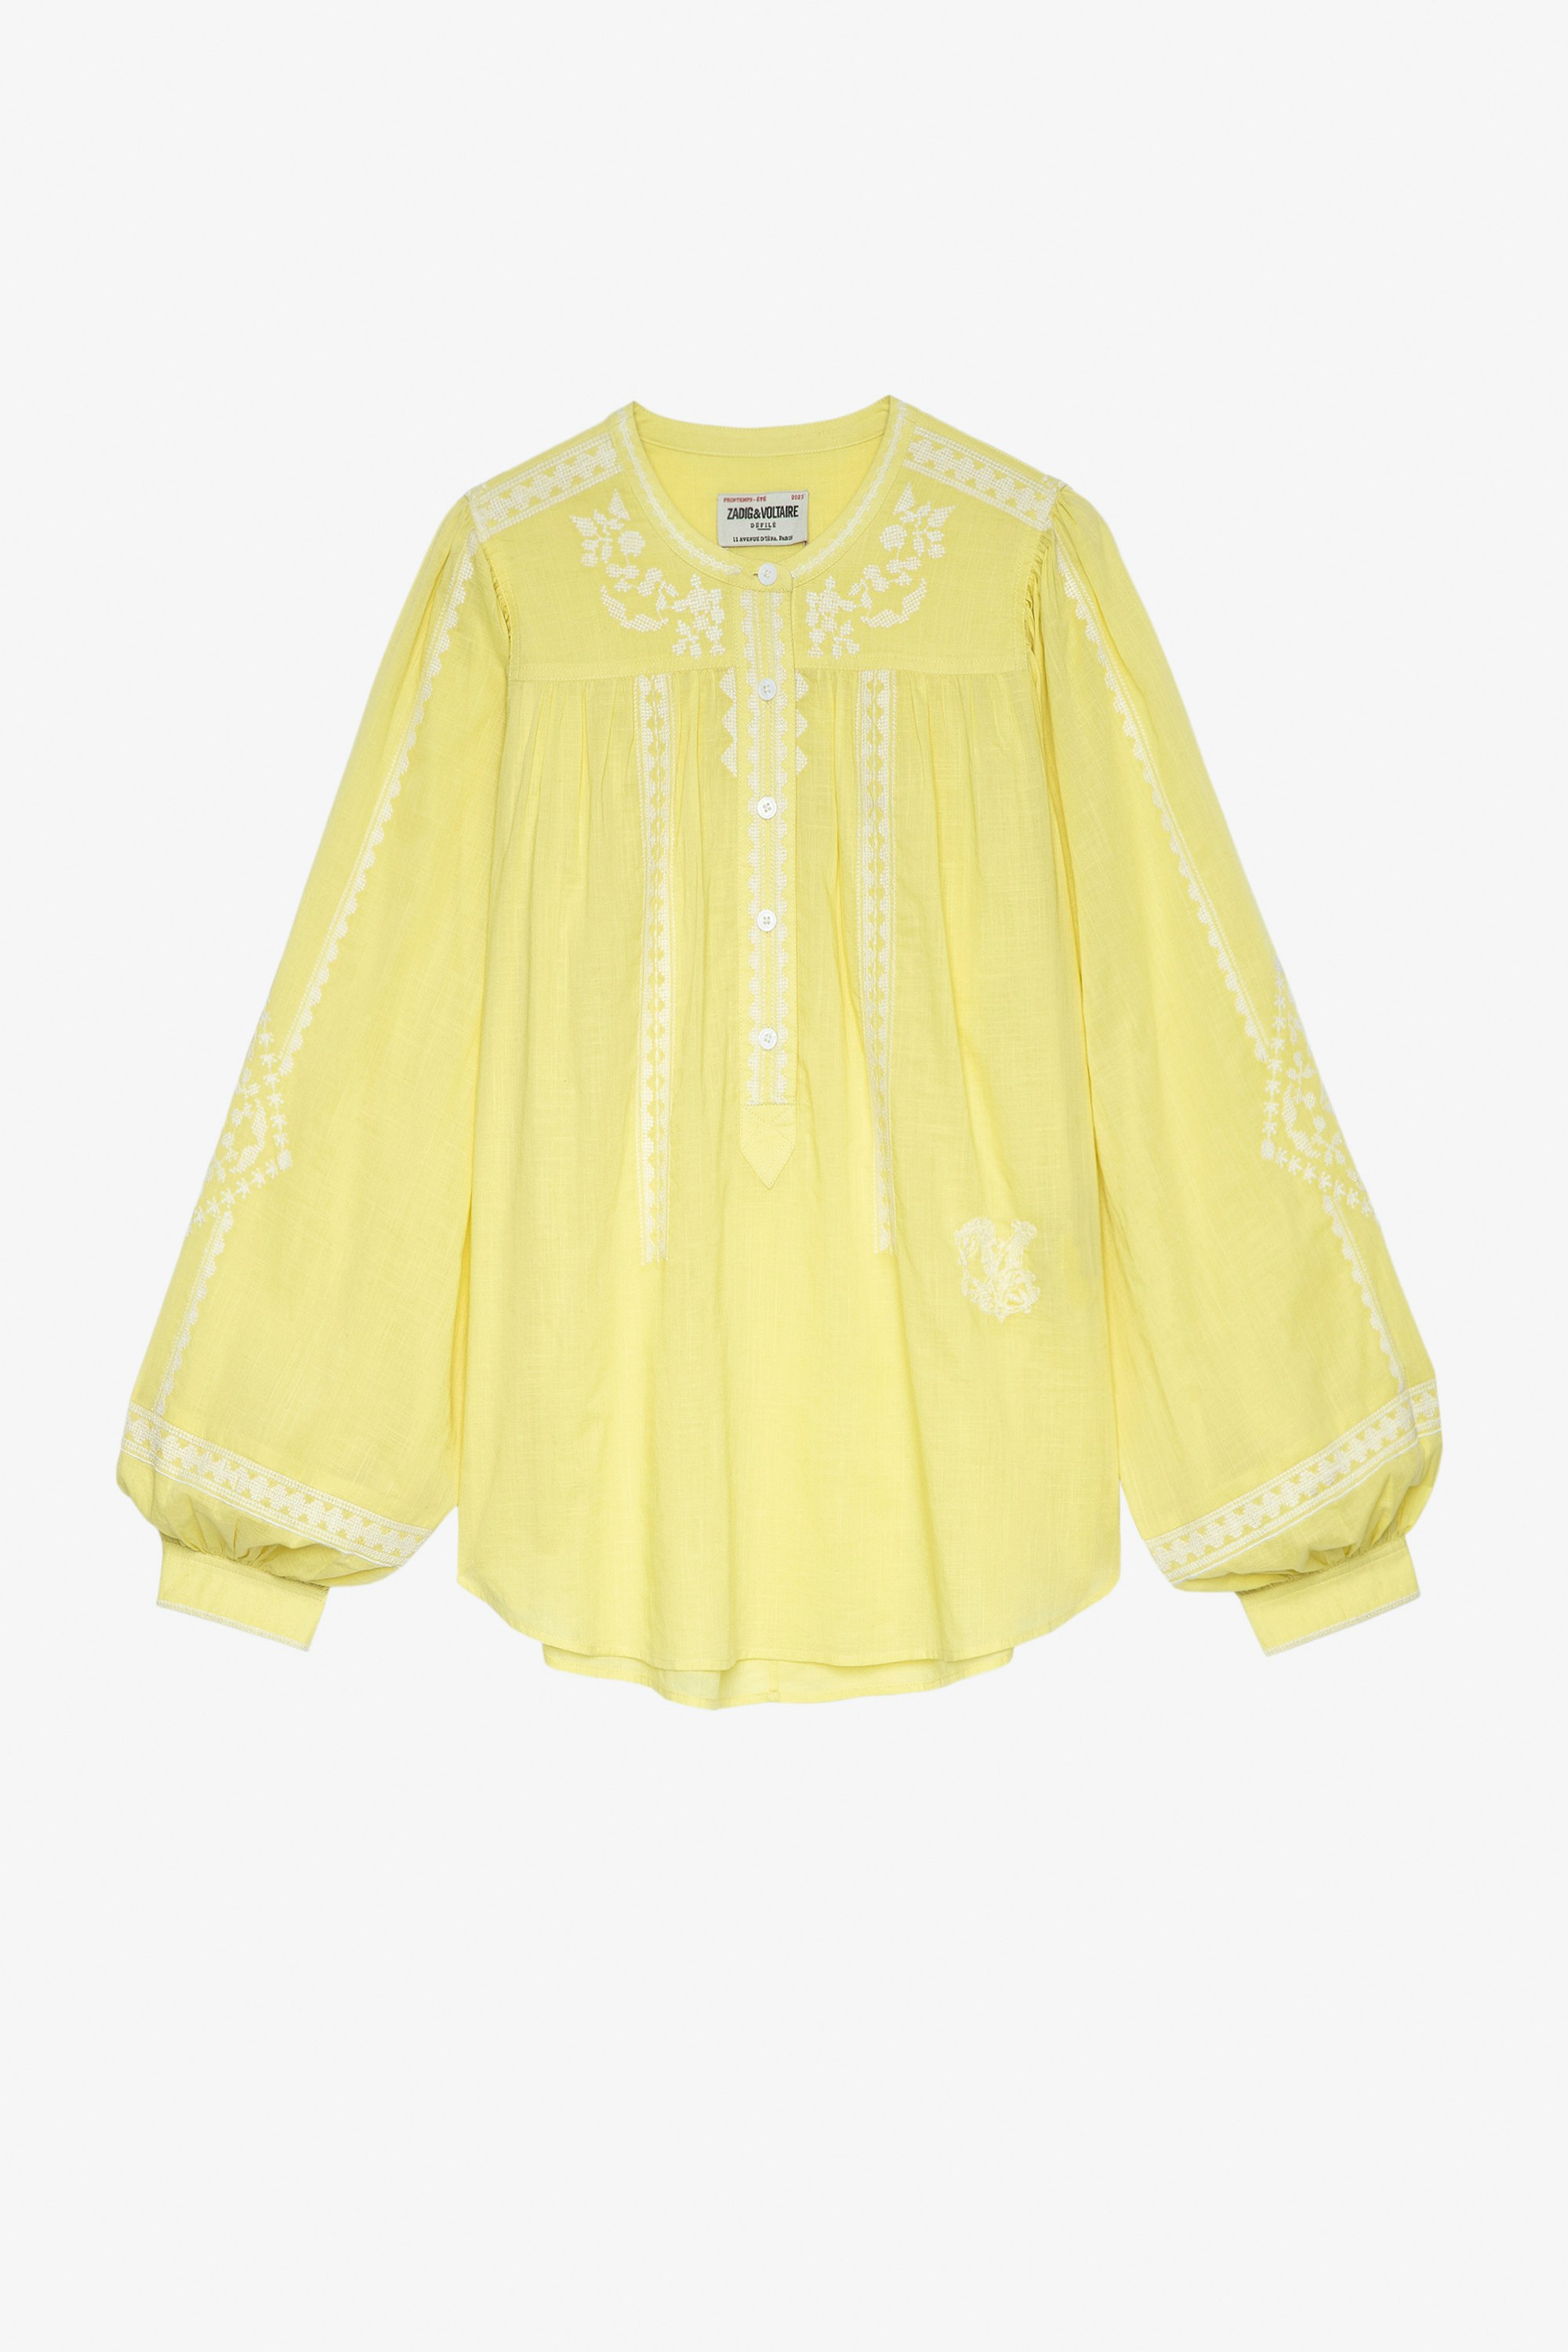 Tigy Shirt Women's embroidered and gathered yellow cotton shirt